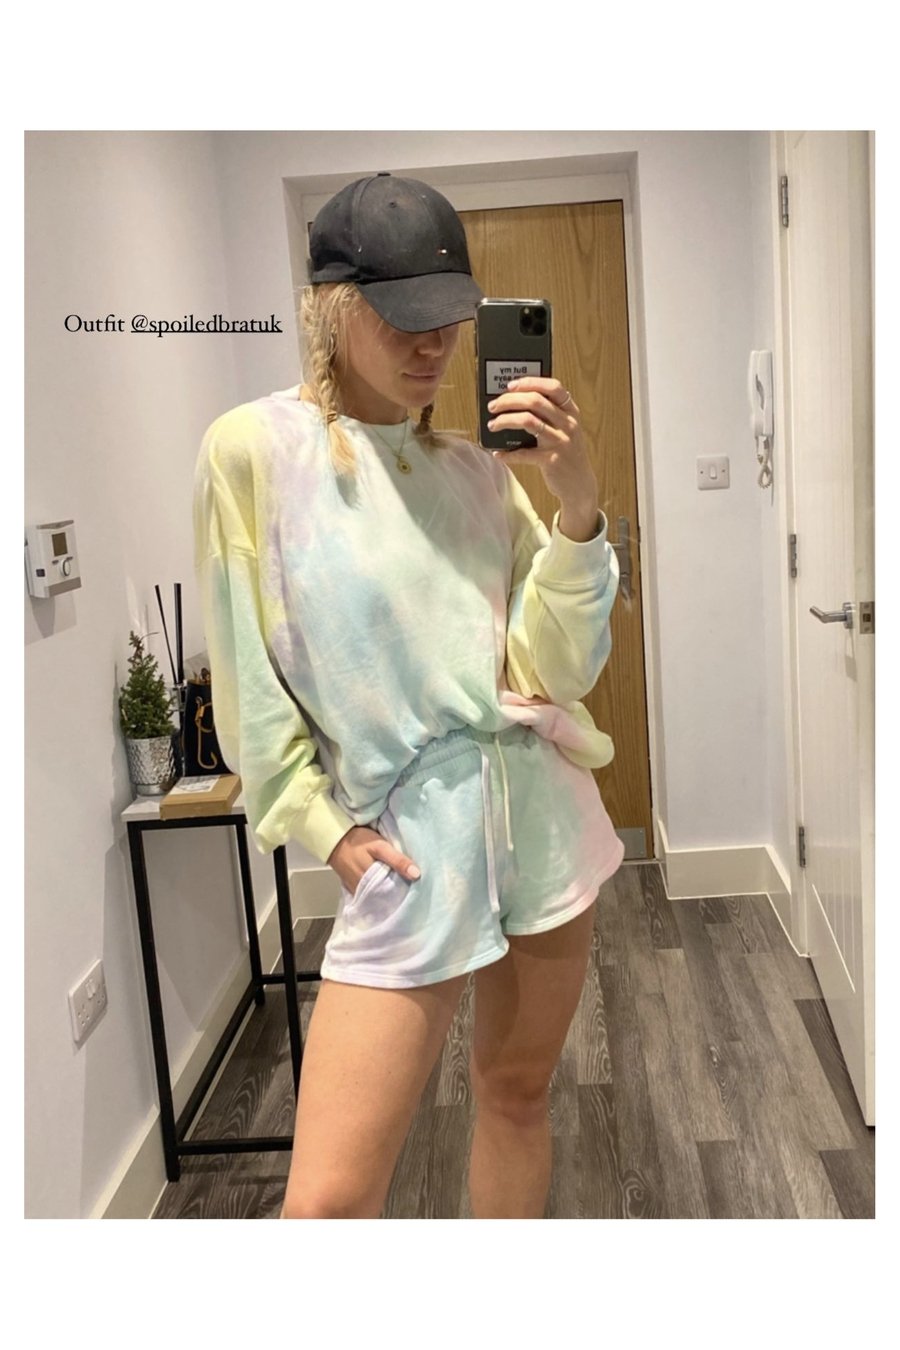 Shop Show Me Your Mumu Tie Dye Girlfriend Shorts as seen on Chloe Meadows - Premium Casual Shorts from Show Me Your Mumu Online now at Spoiled Brat 